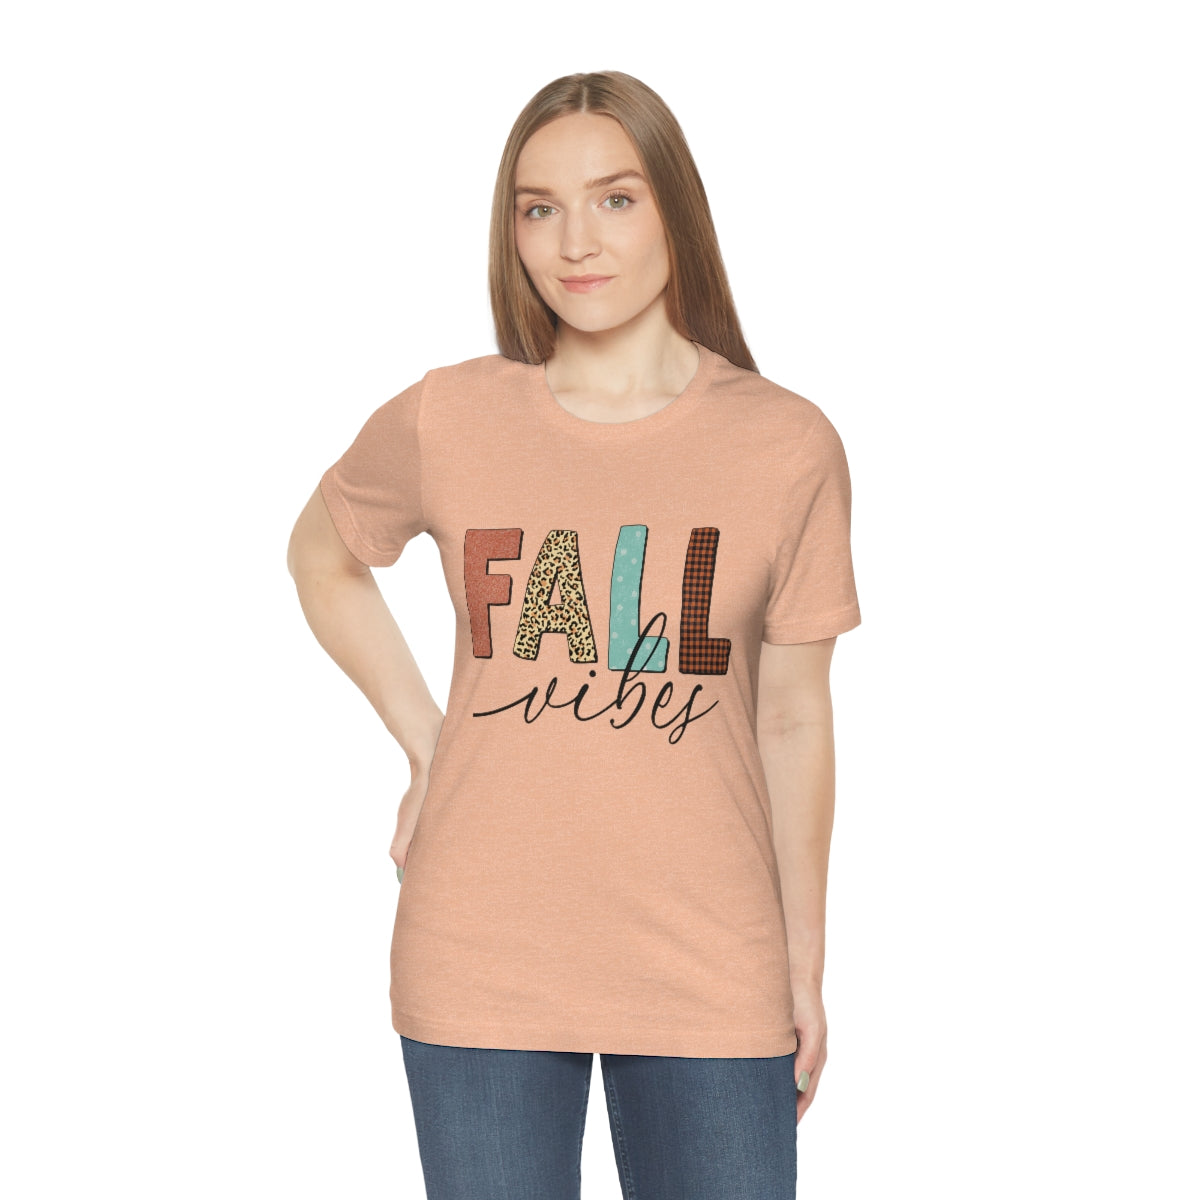 Fall Vibes with Leopard, Polka Dot and Plaid Print Unisex Jersey Short Sleeve Tee S-3XL